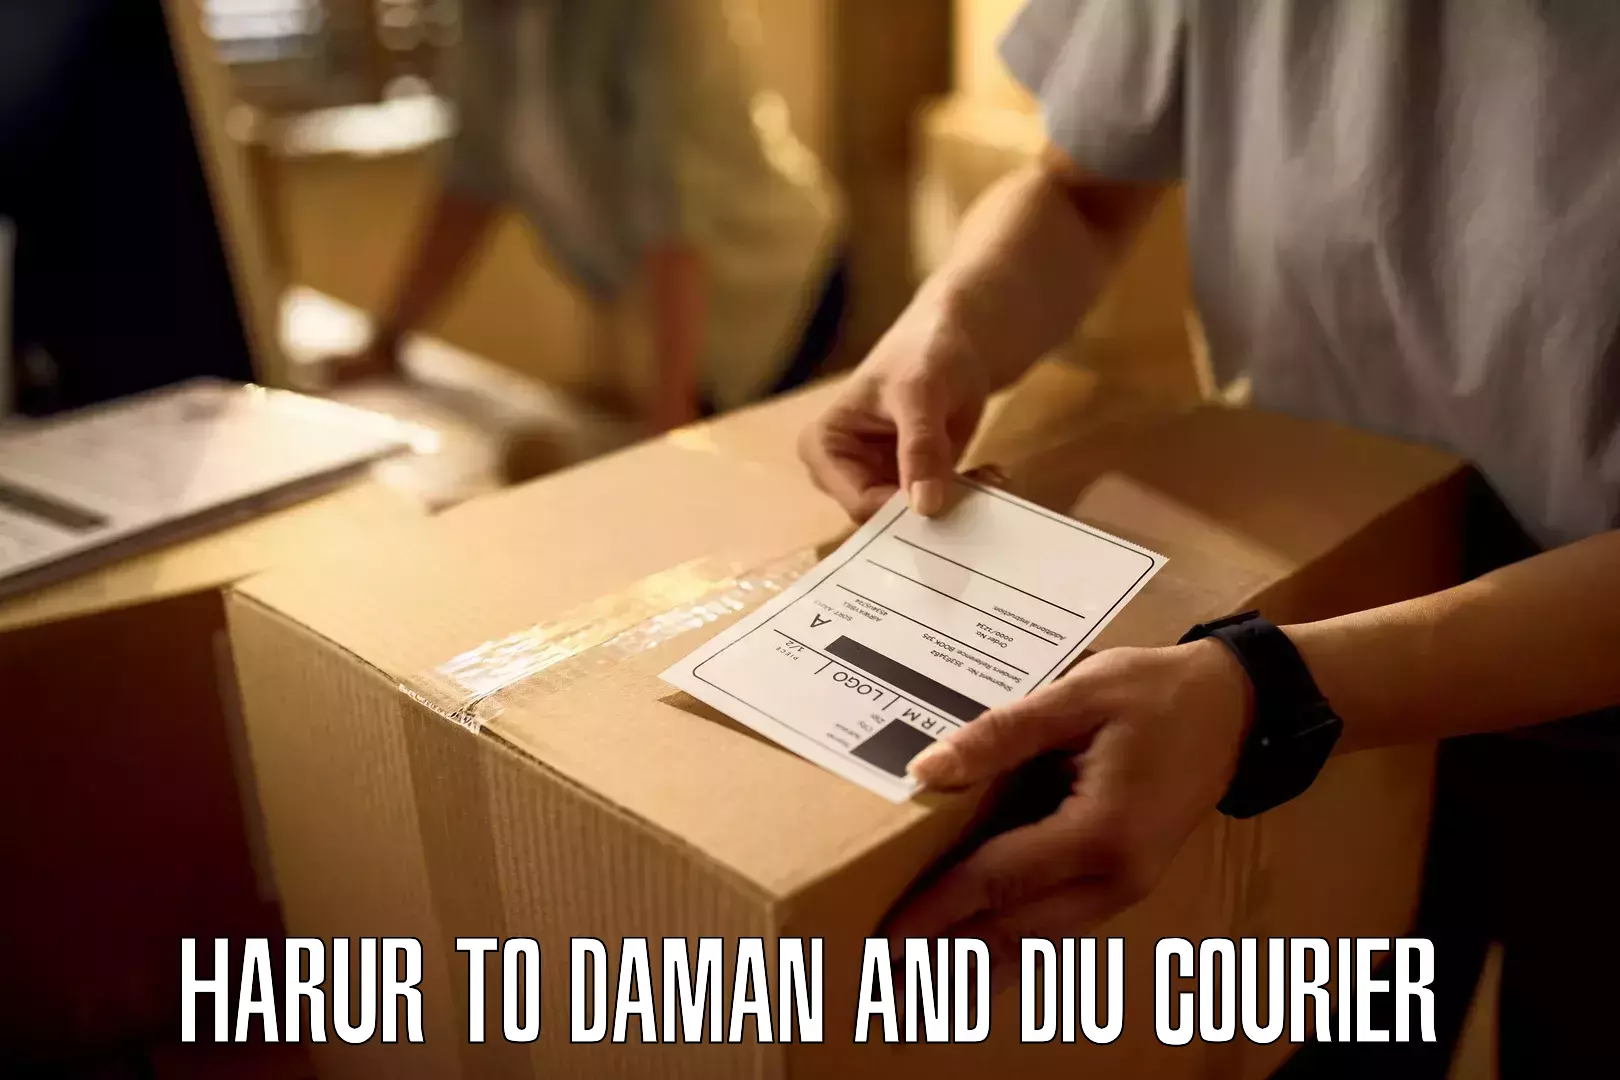 On-call courier service Harur to Daman and Diu